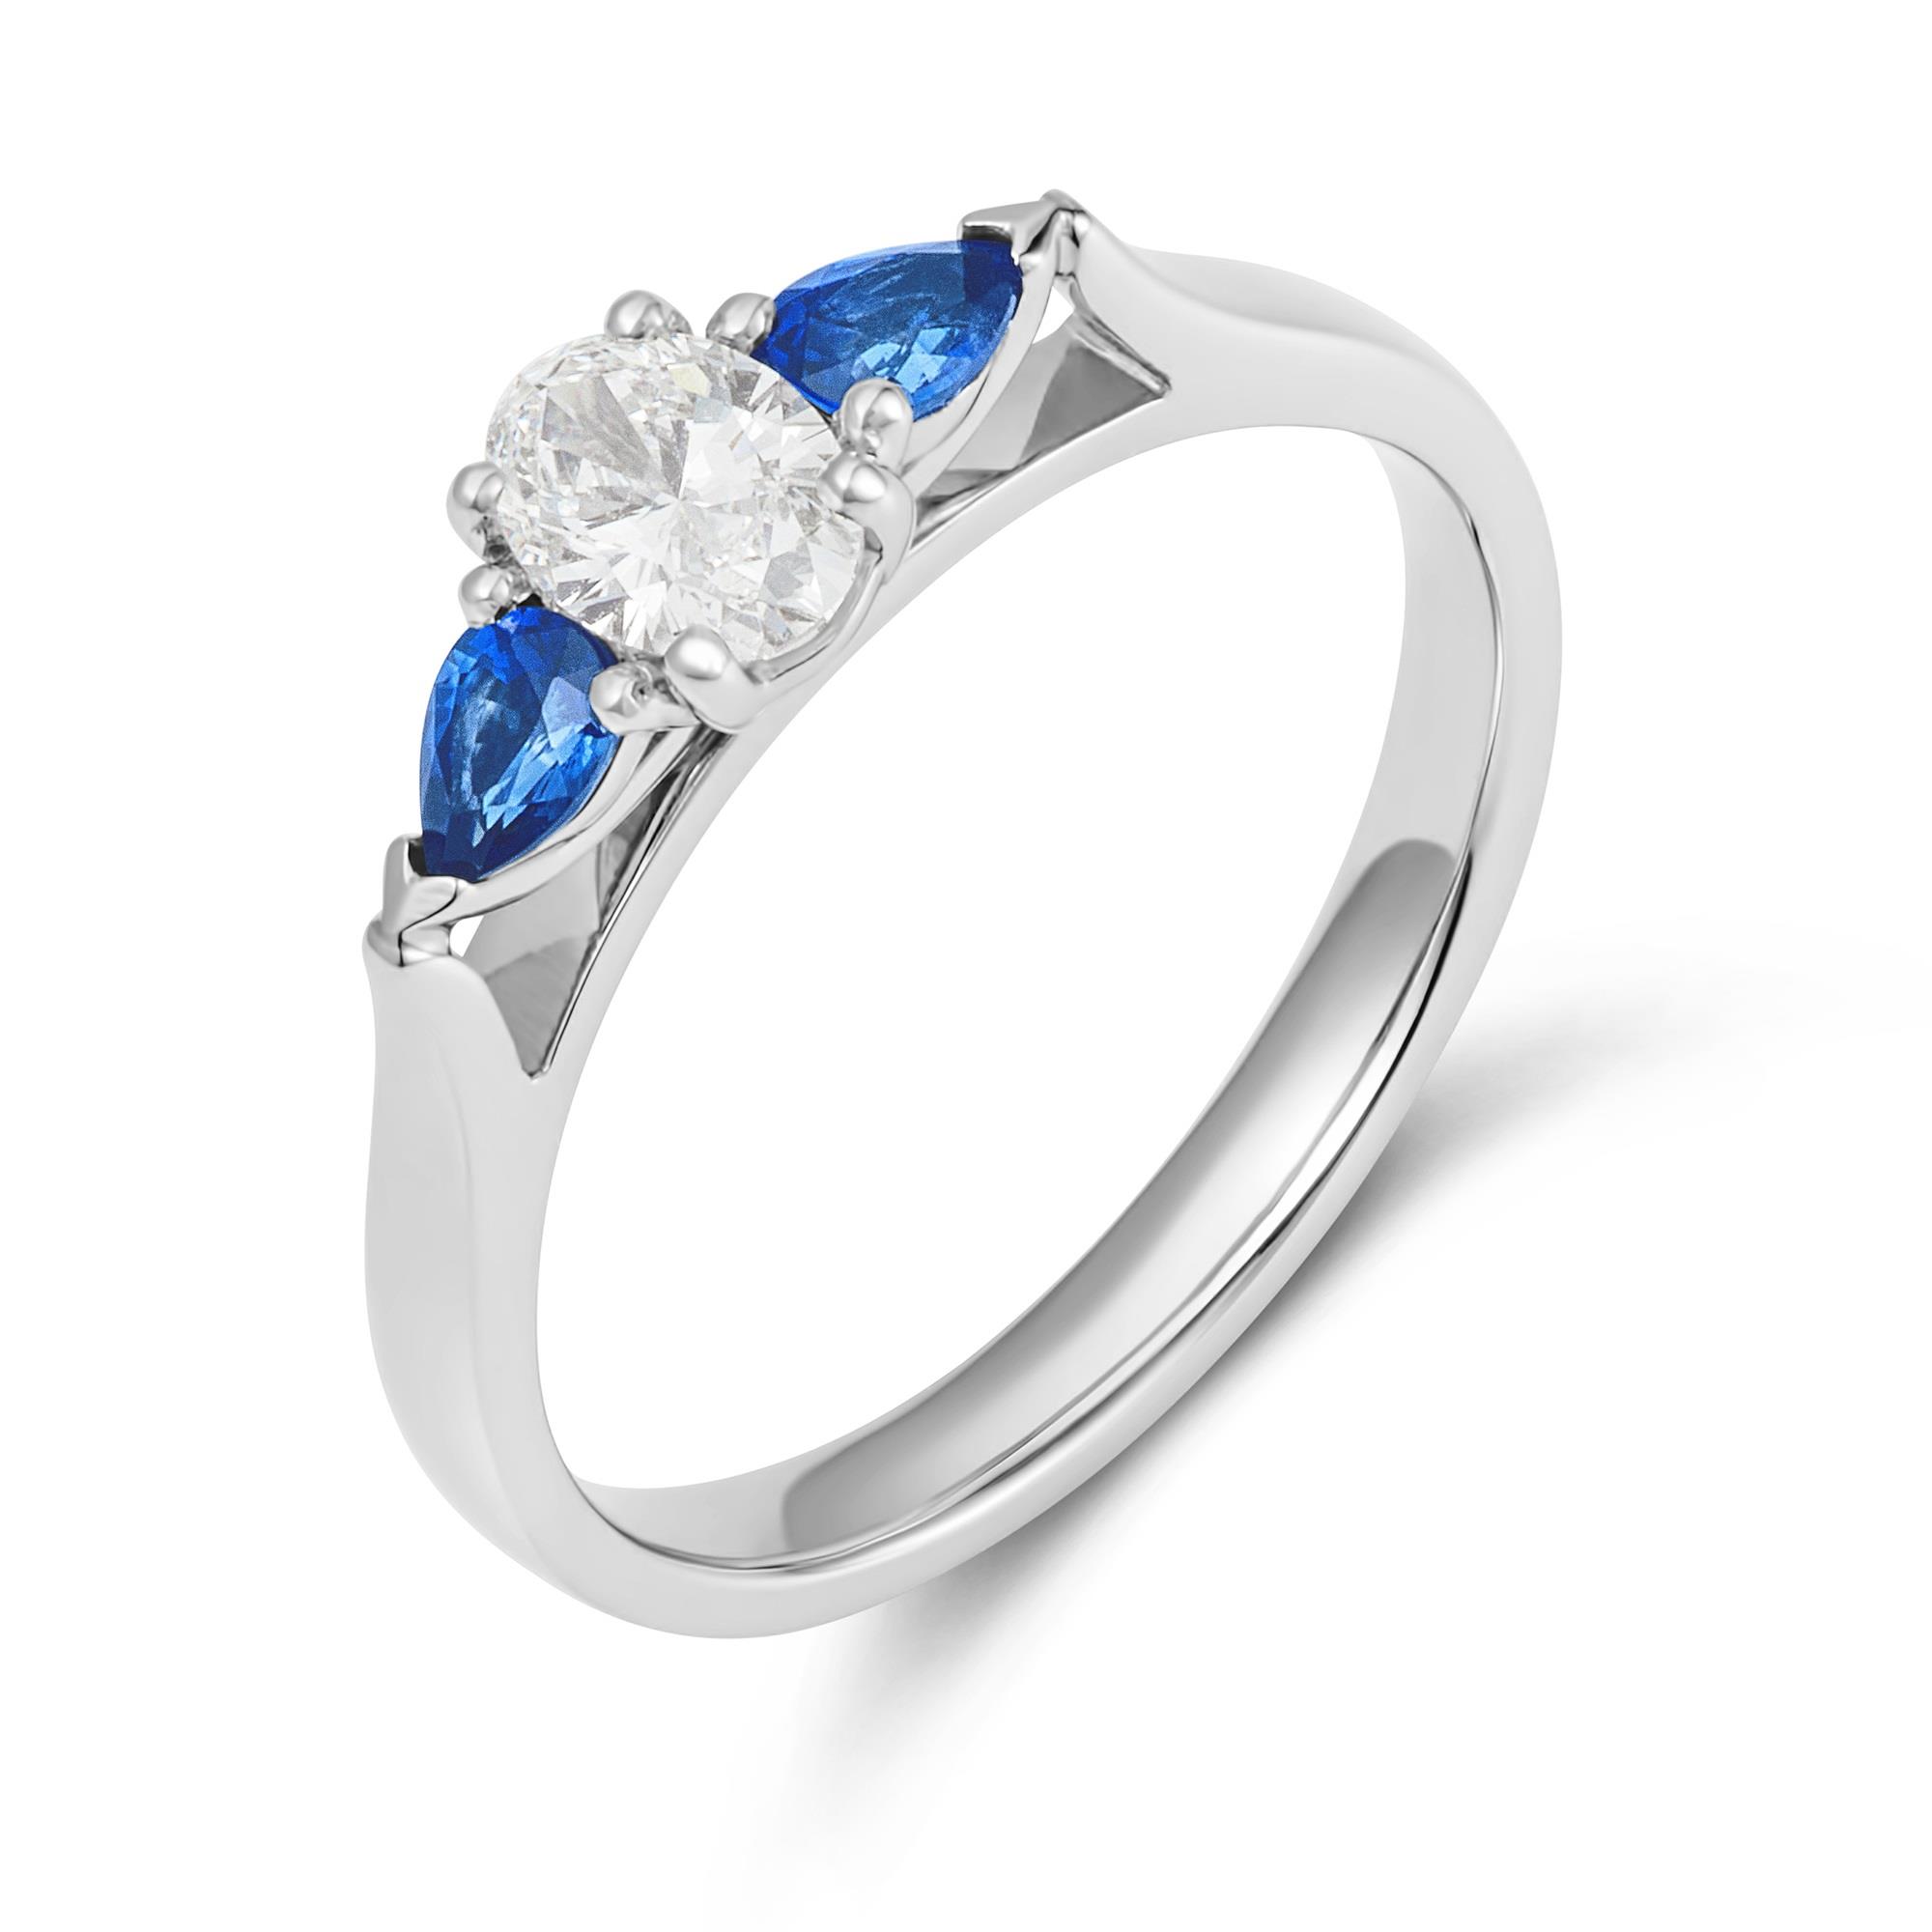 Oval Diamond and Pear Shape Sapphire Ring | Pravins